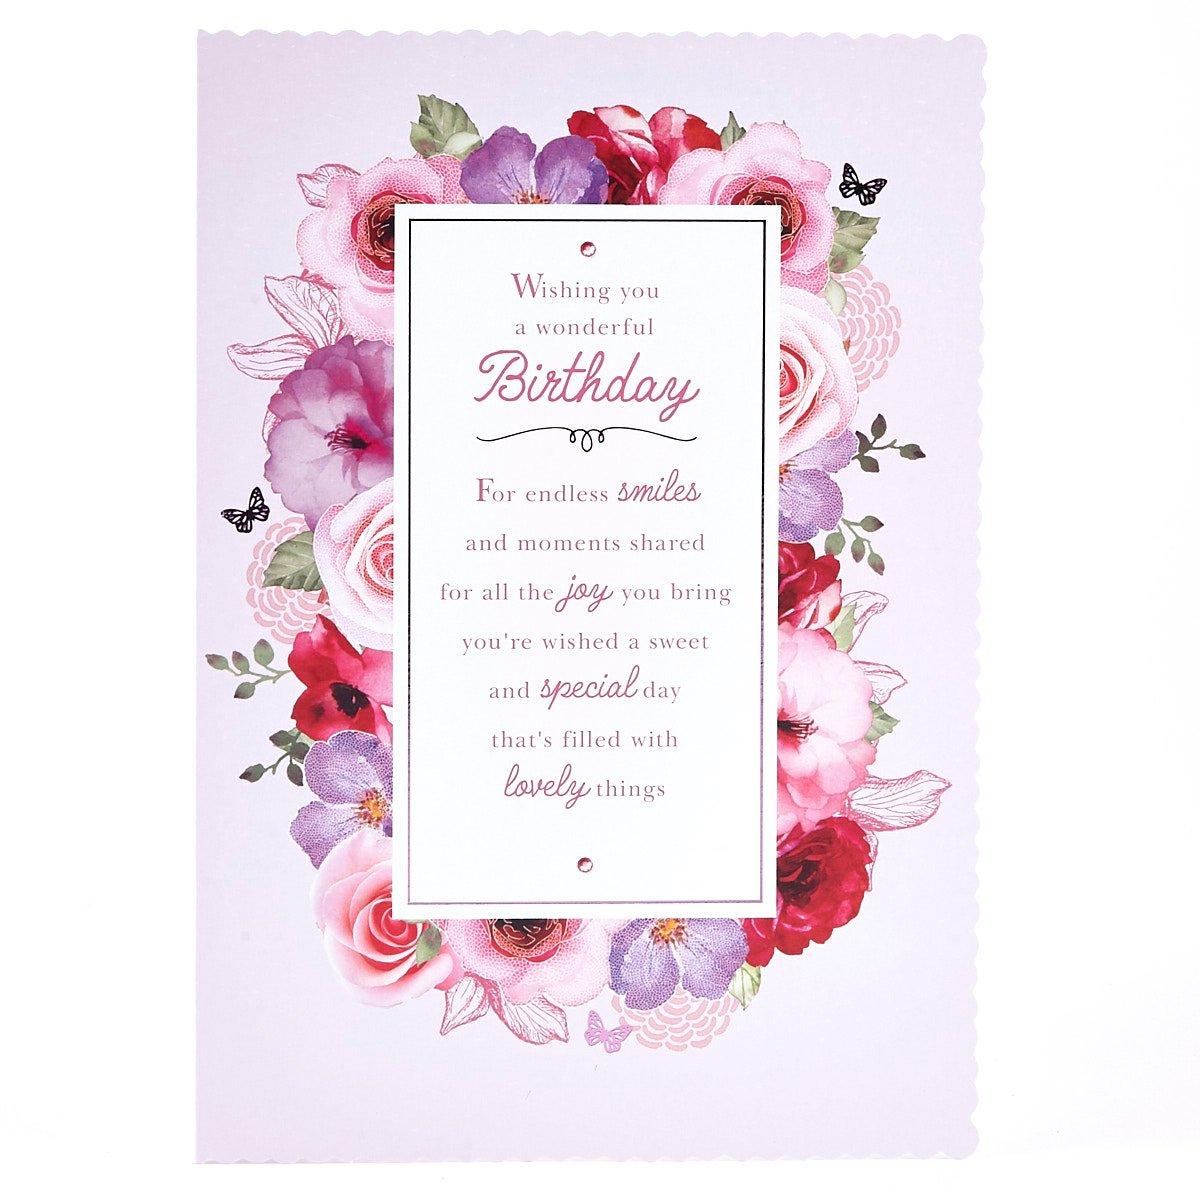 Buy Birthday Card - Pink Floral Border for GBP 0.99 | Card Factory UK